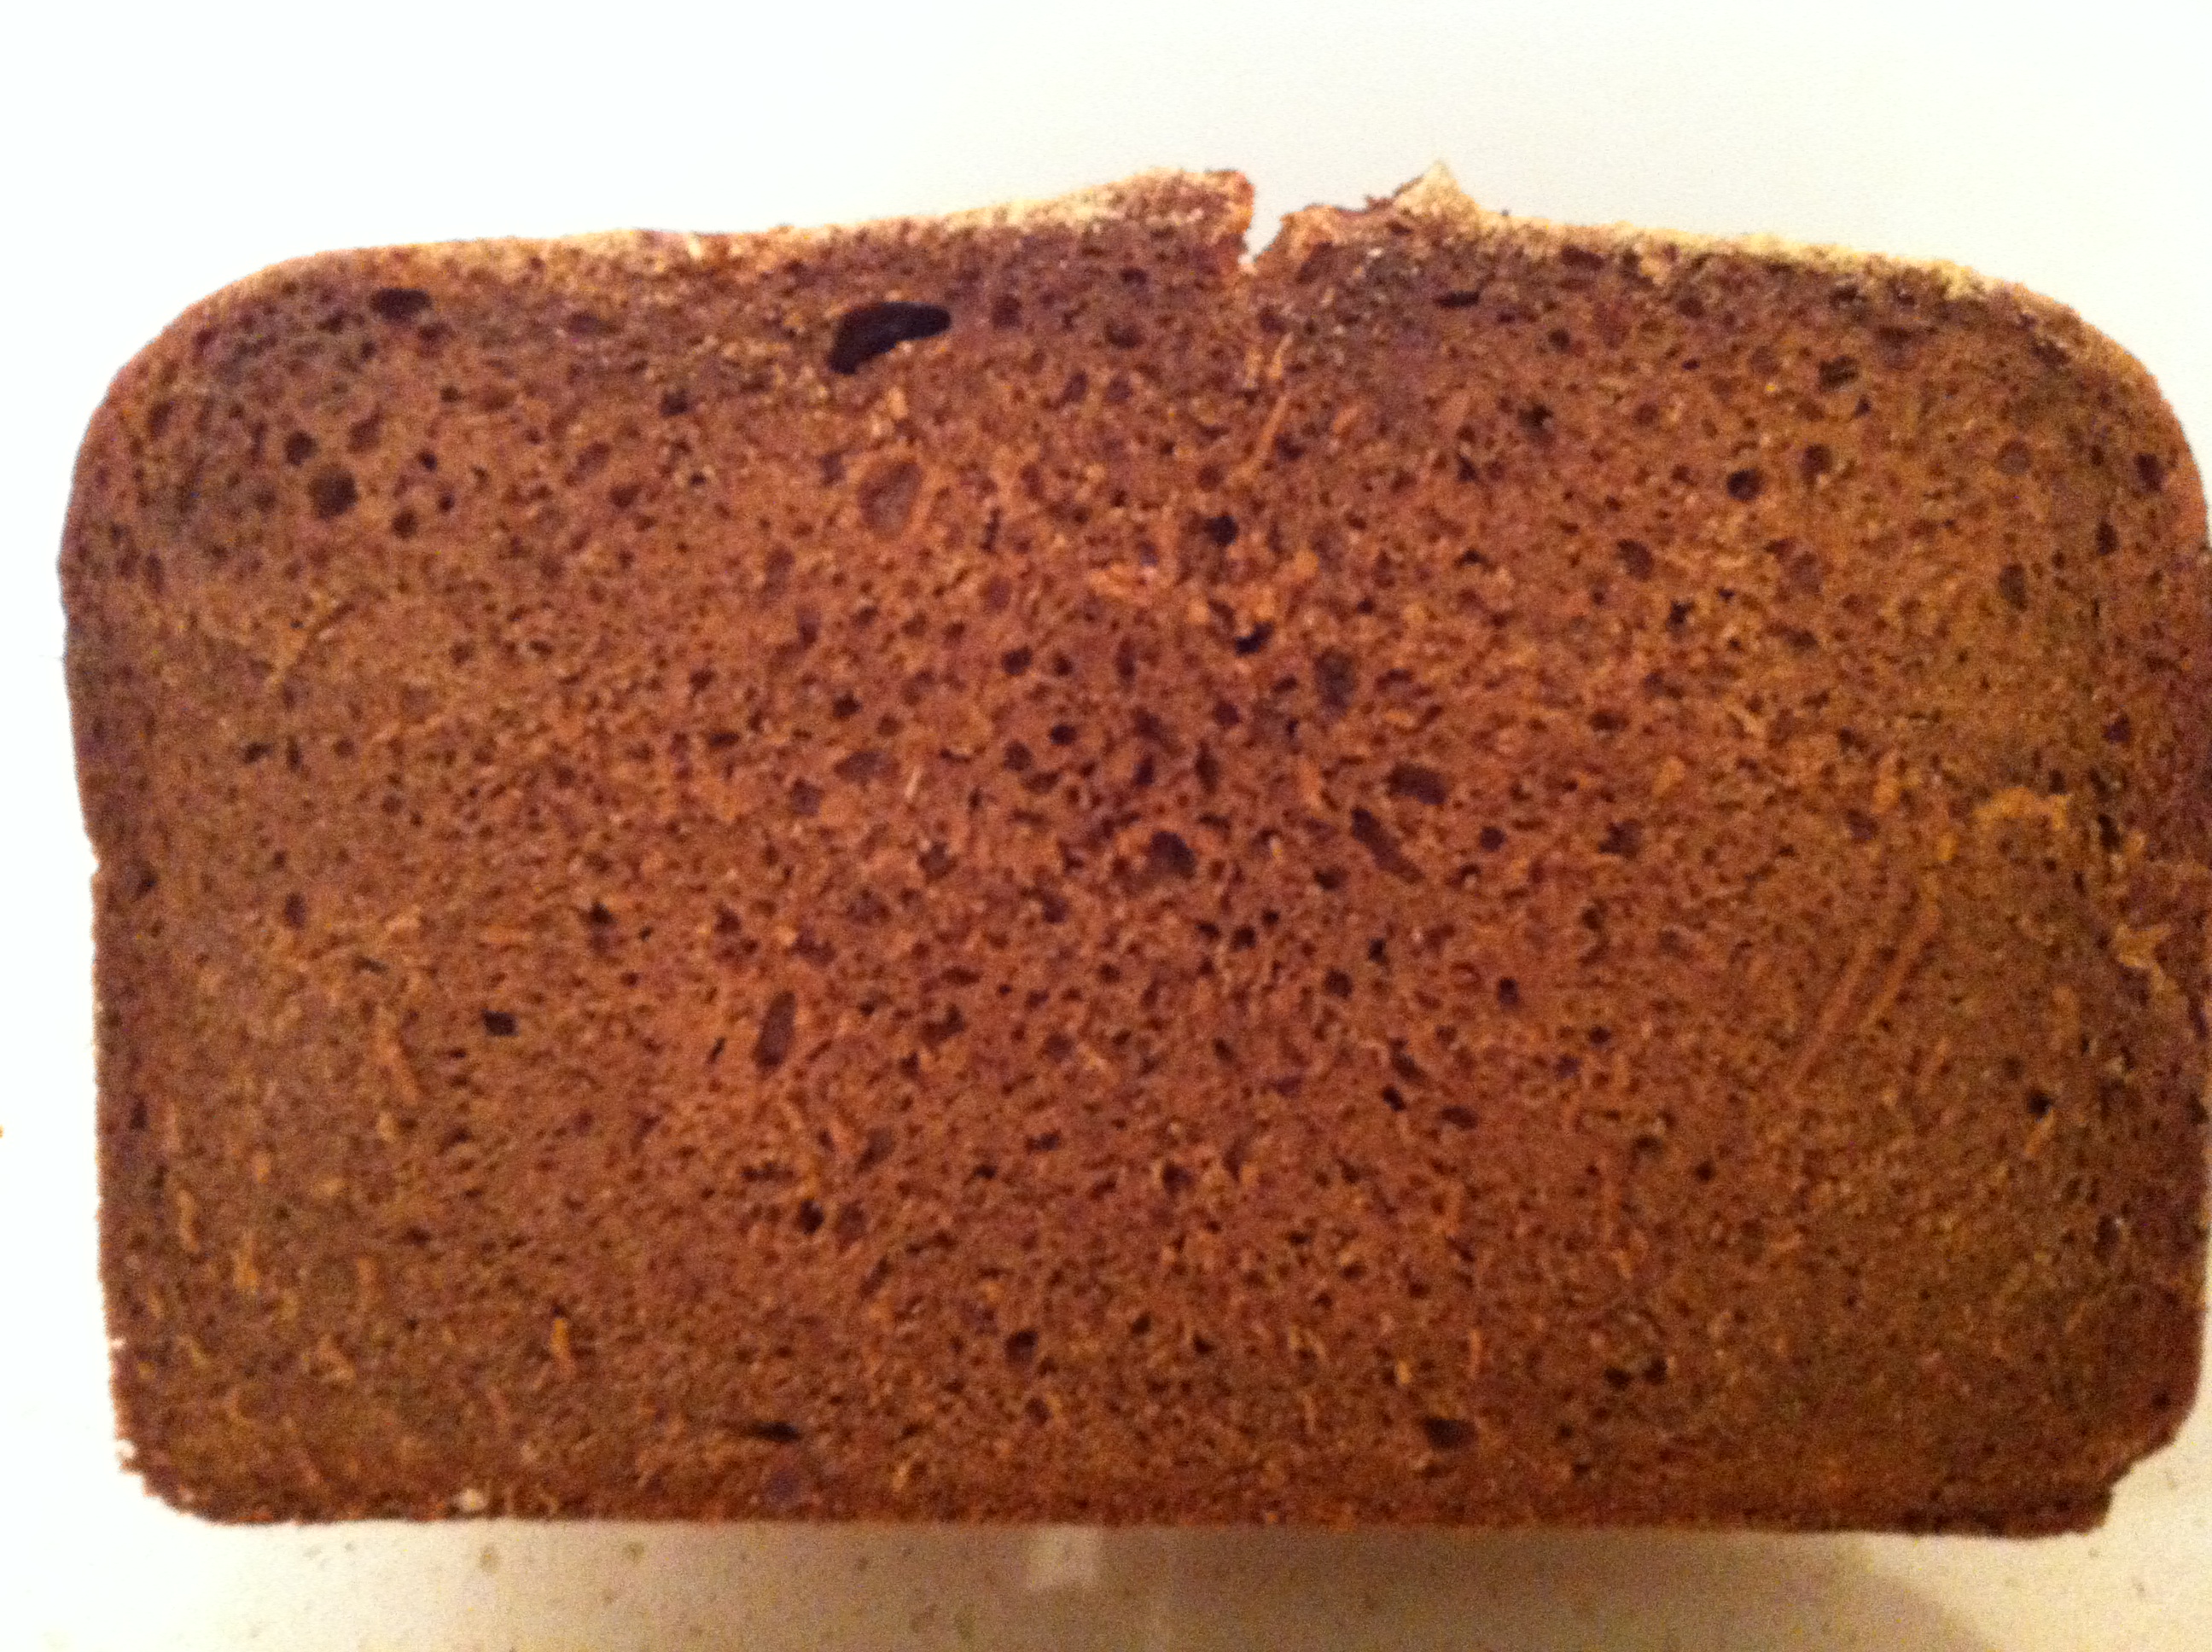 Custard rye bread is real (almost forgotten taste).Baking methods and additives